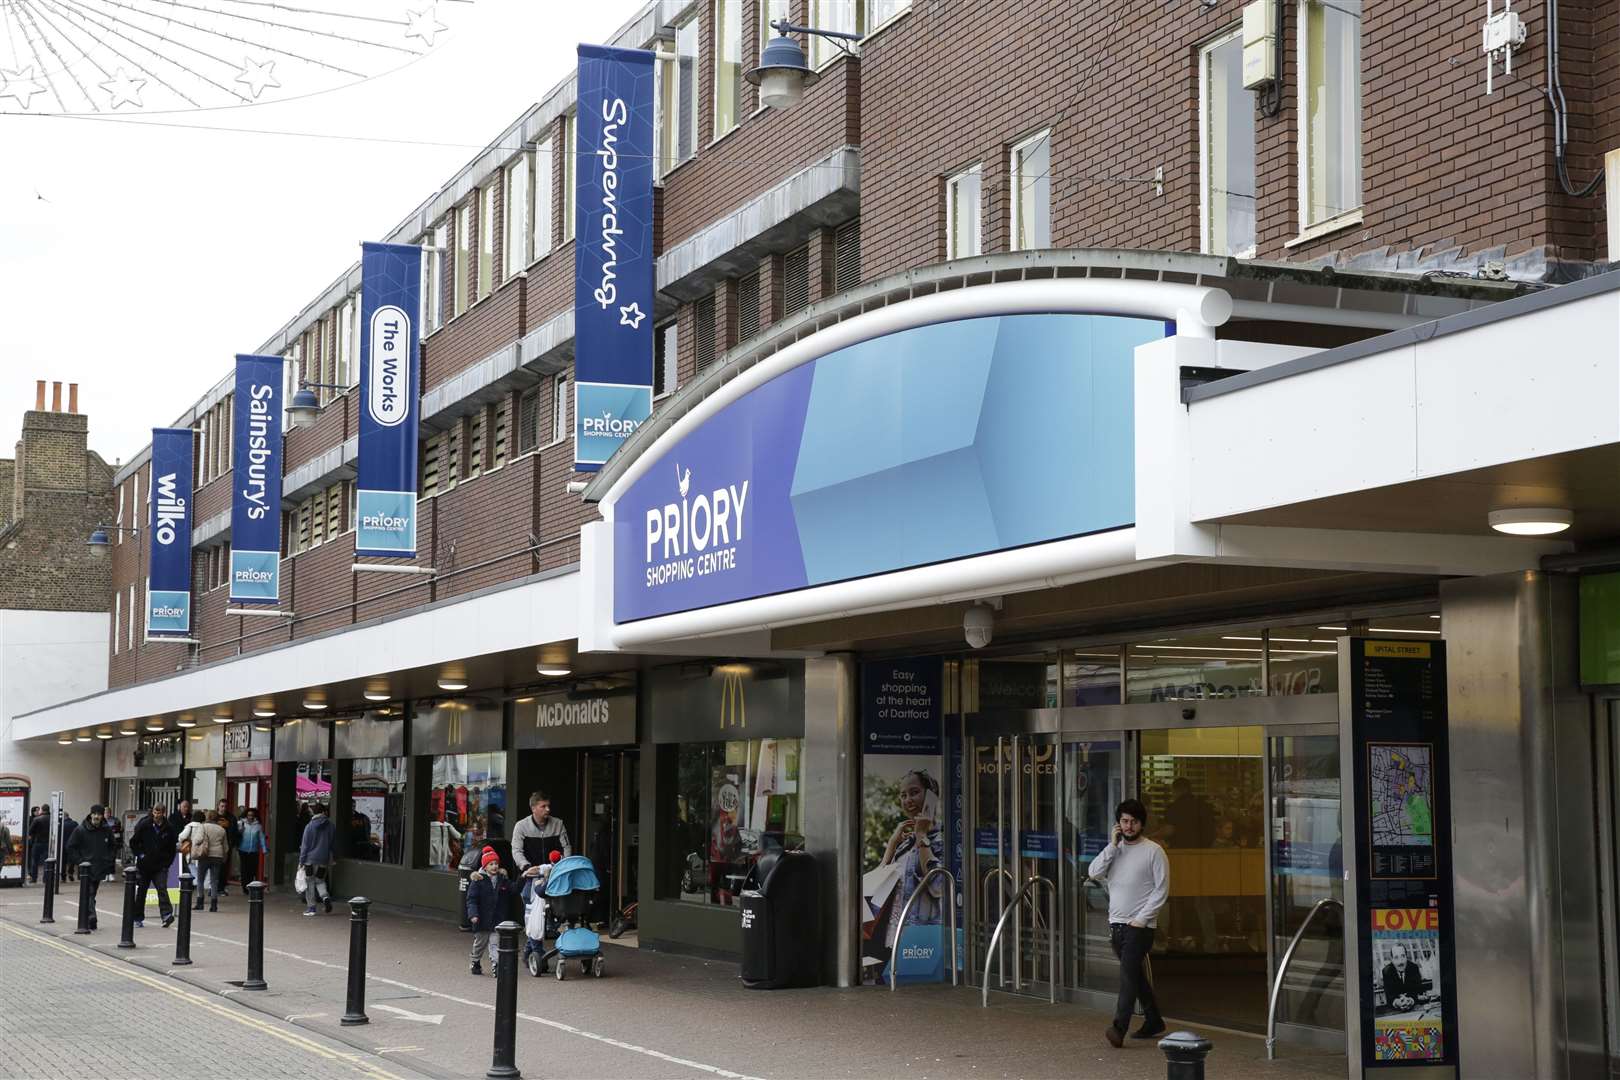 The robbery was reported to have taken place at the Priory Shopping Centre in Dartford. Picture: Martin Apps